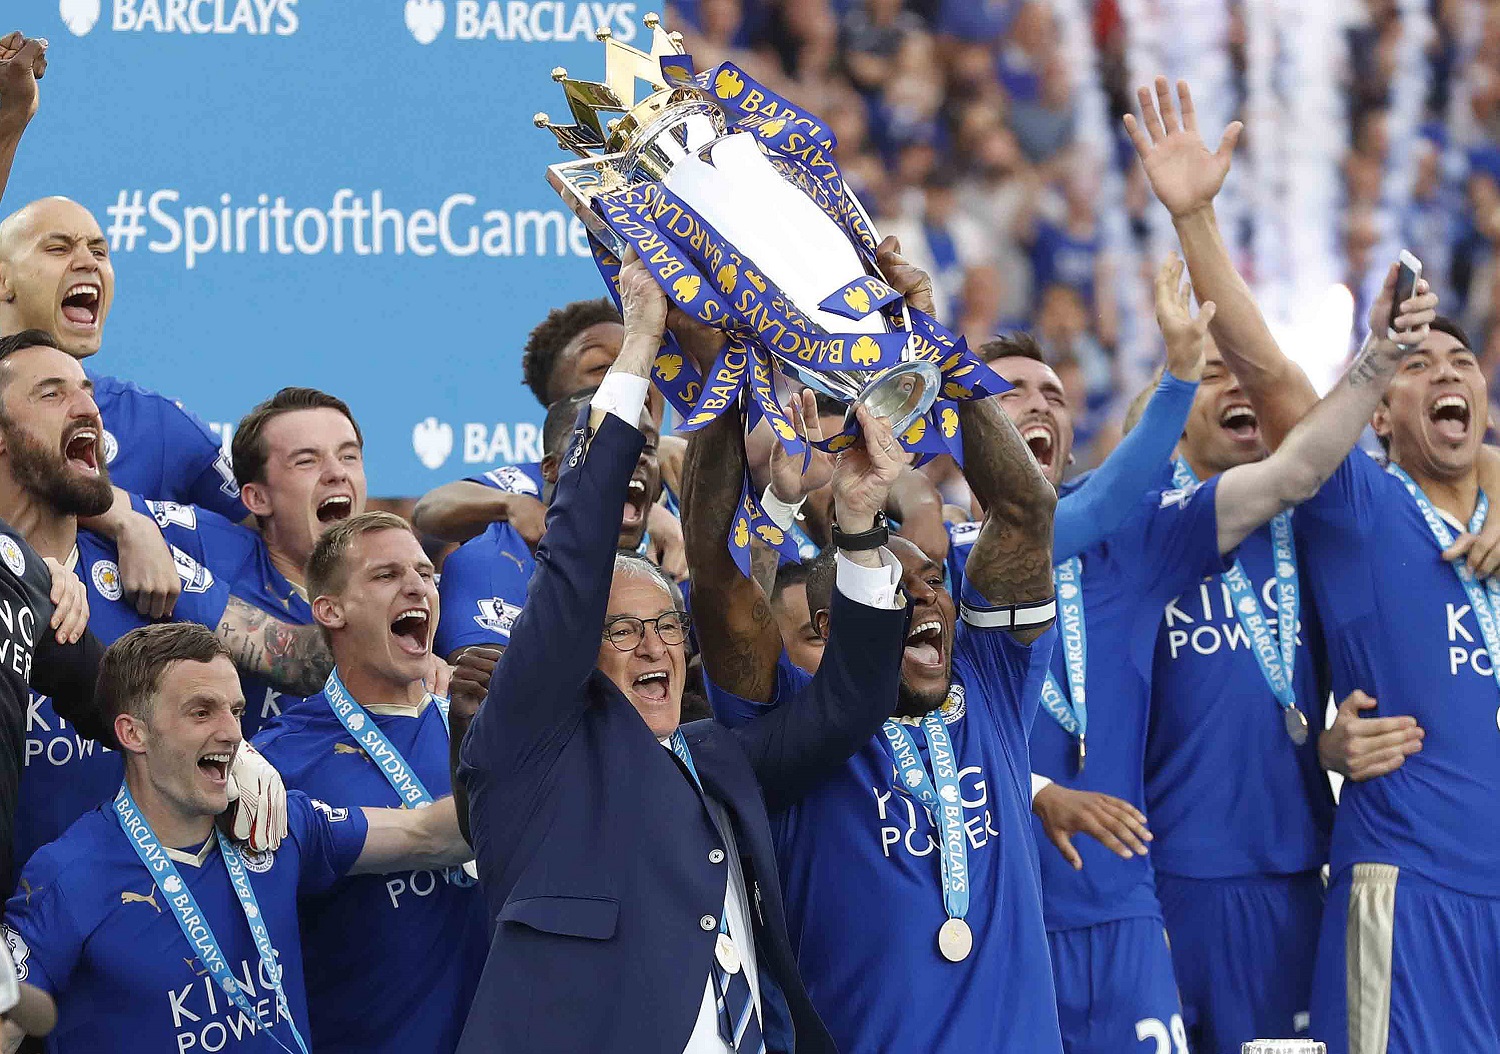 Leicesters team manager Claudio Ranieri and Leicesters Wes Morgan lift the trophy as Leicester City celebrate becoming the English Premier League soccer champions at King Power stadium in Leicester, England, Saturday, May 7, 2016.(AP Photo/Matt Dunham)